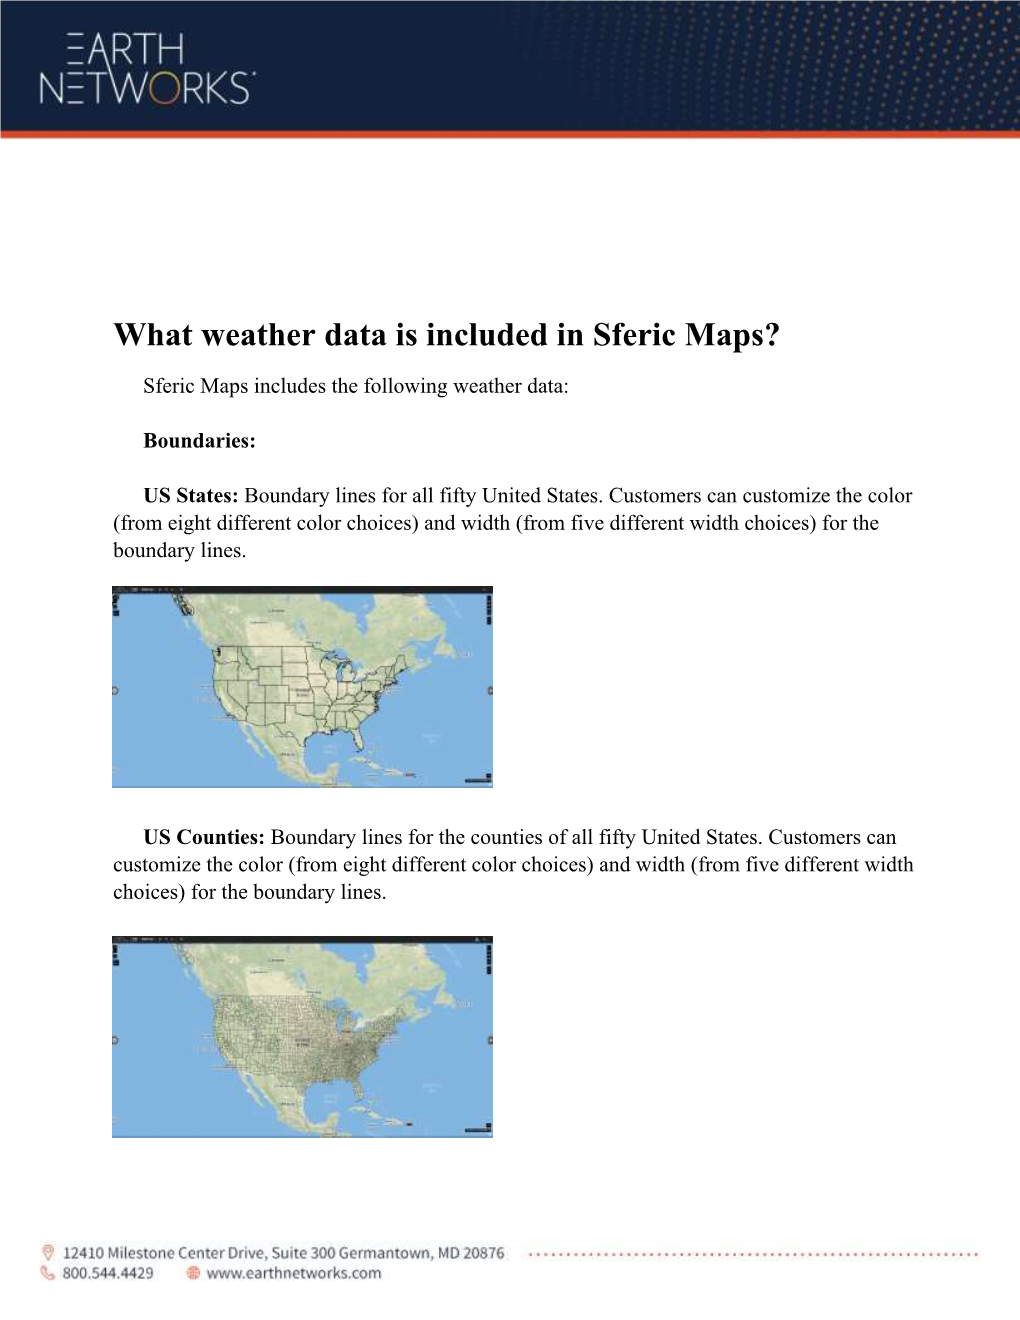 What Weather Data Is Included in Sferic Maps?